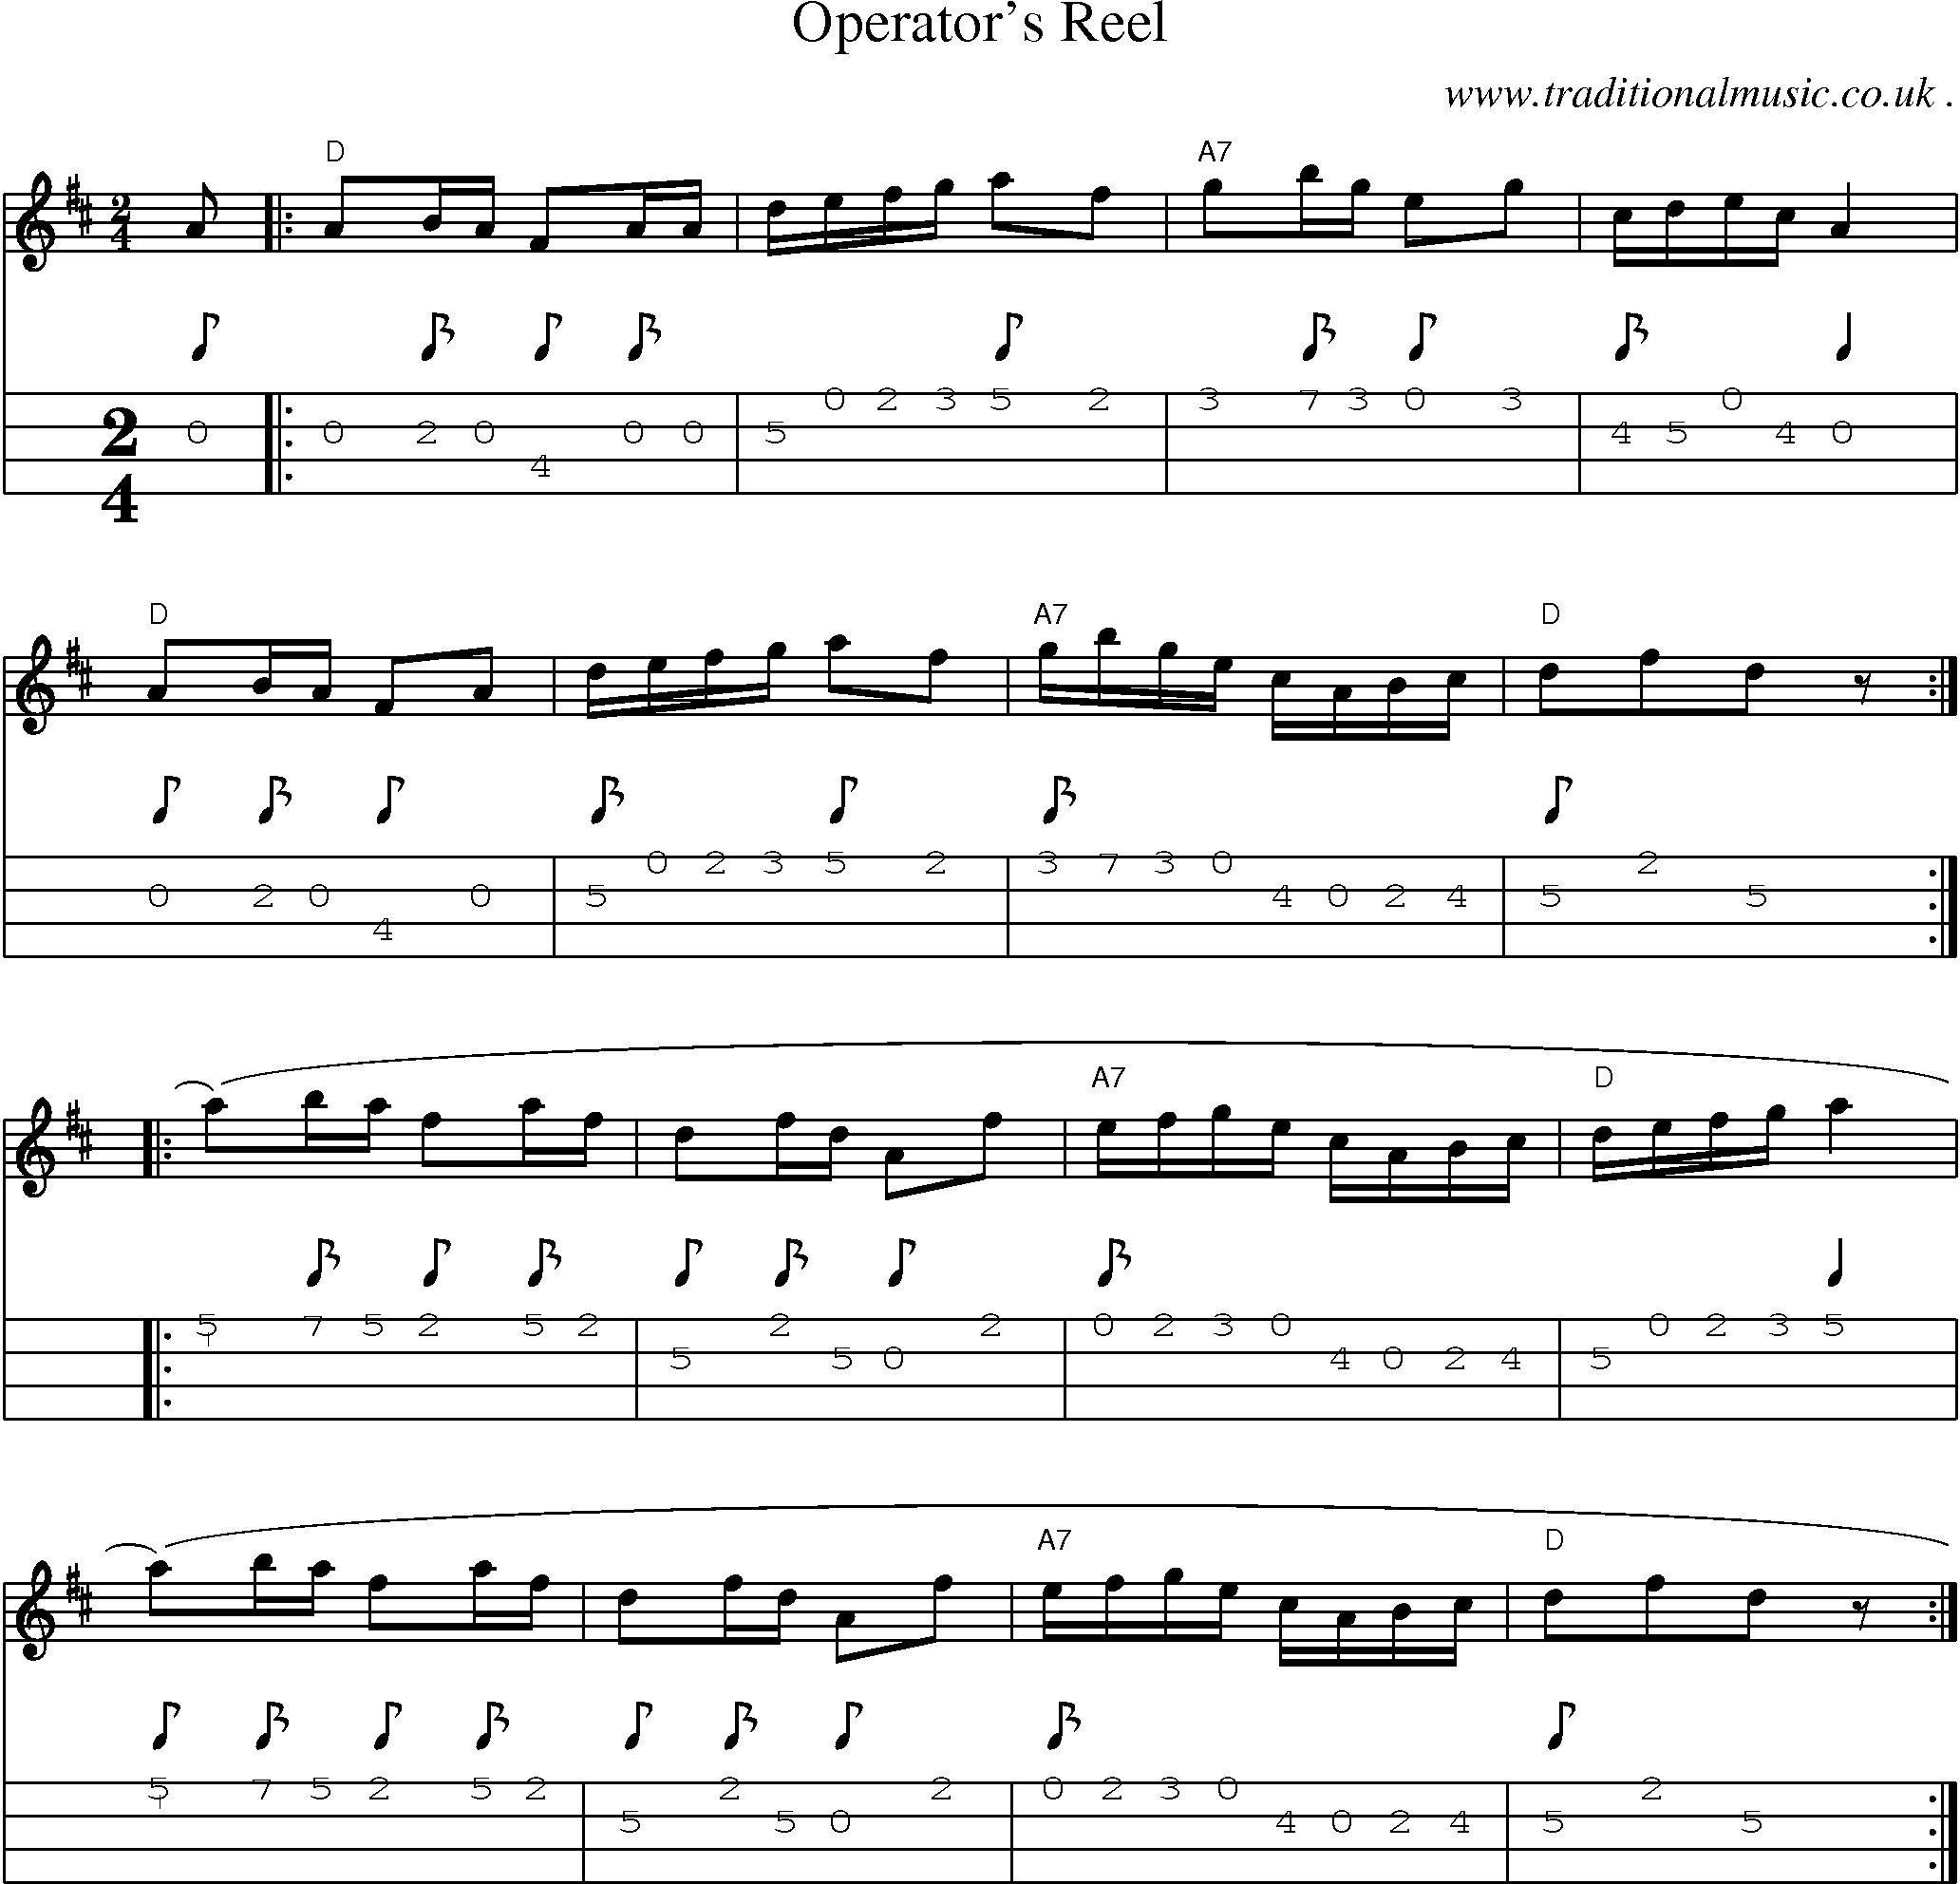 Sheet-Music and Mandolin Tabs for Operators Reel